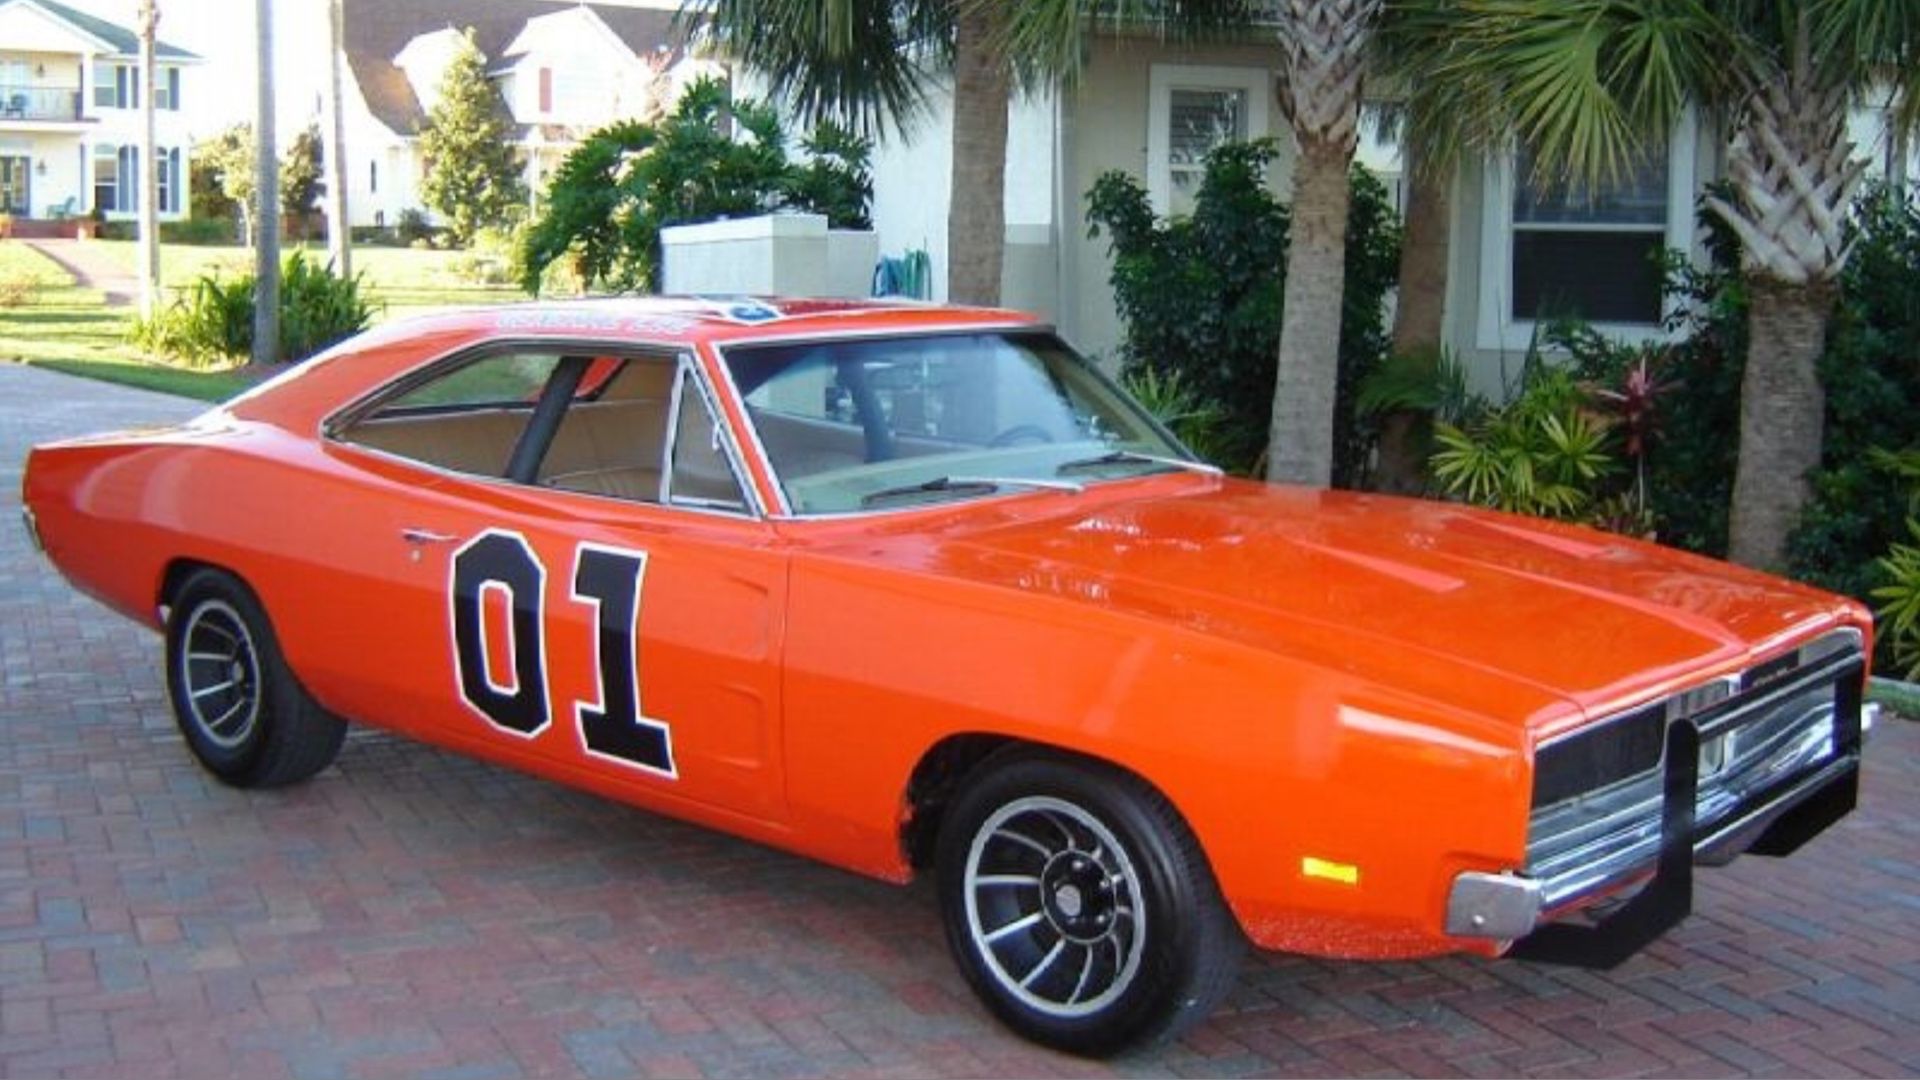 10 Things You Probably Didn't Know About The Dukes Of Hazzard General Lee